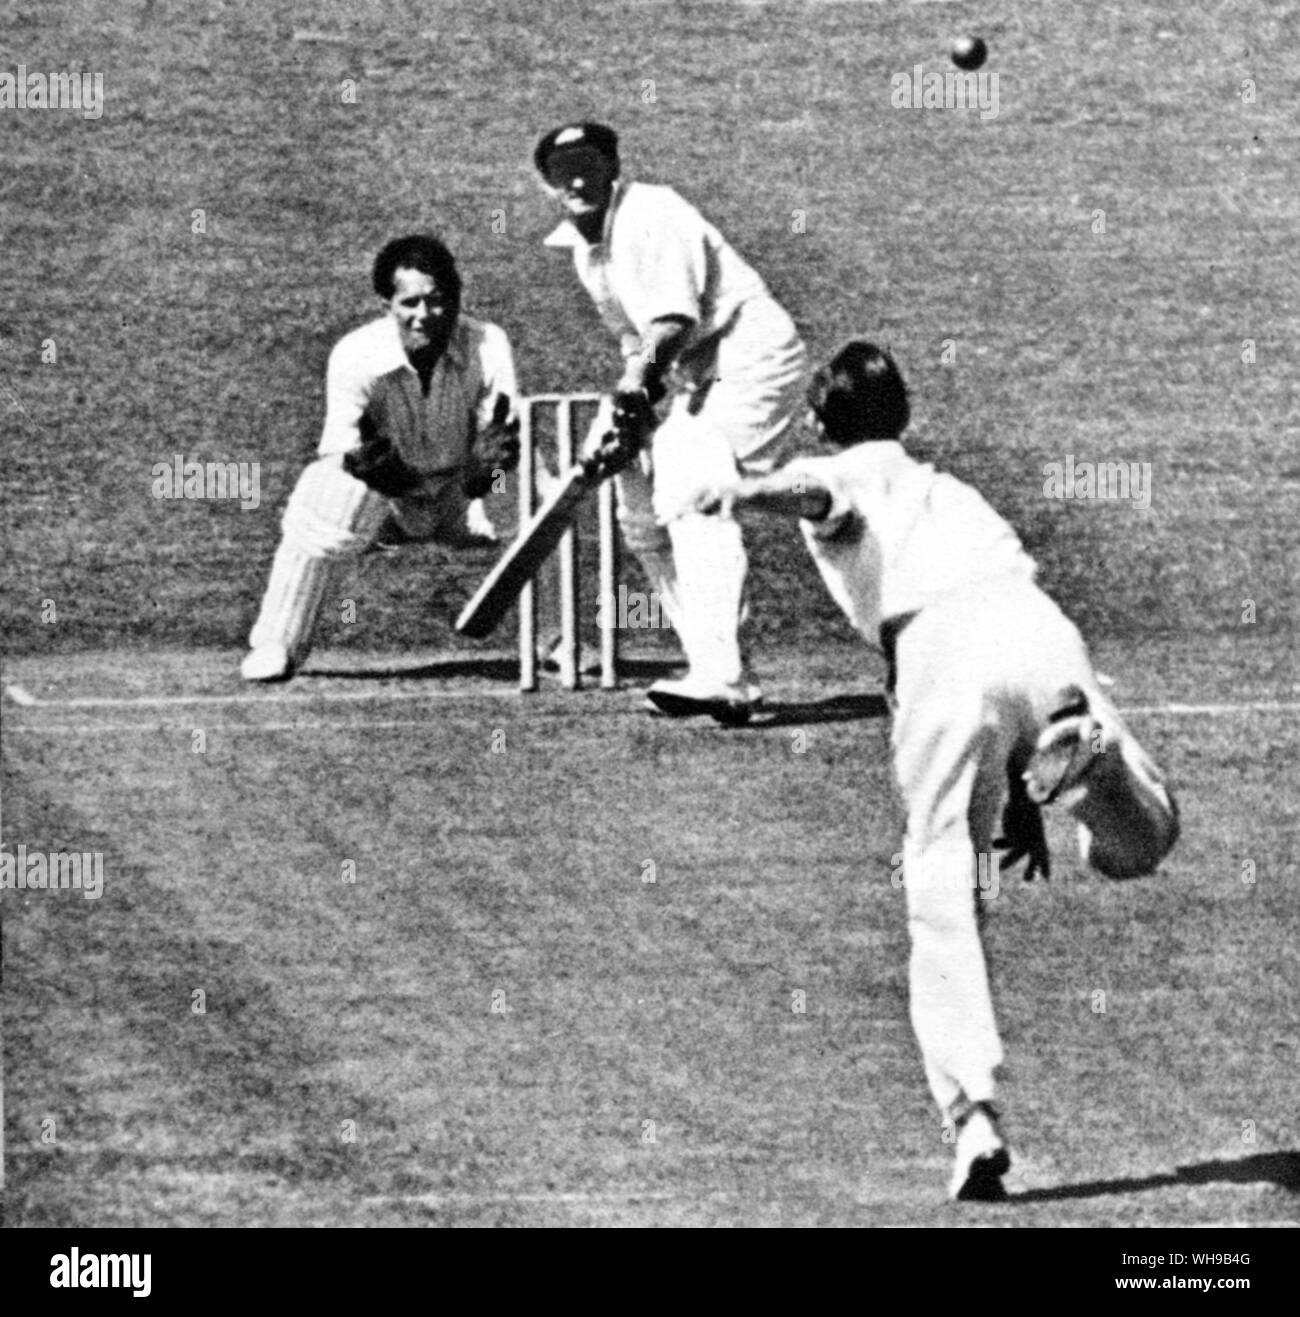 Sir Don G Bradman batting against Essex at Southend in 1948. Peter Smith is the bowler  F Rist is keeping wicket Stock Photo